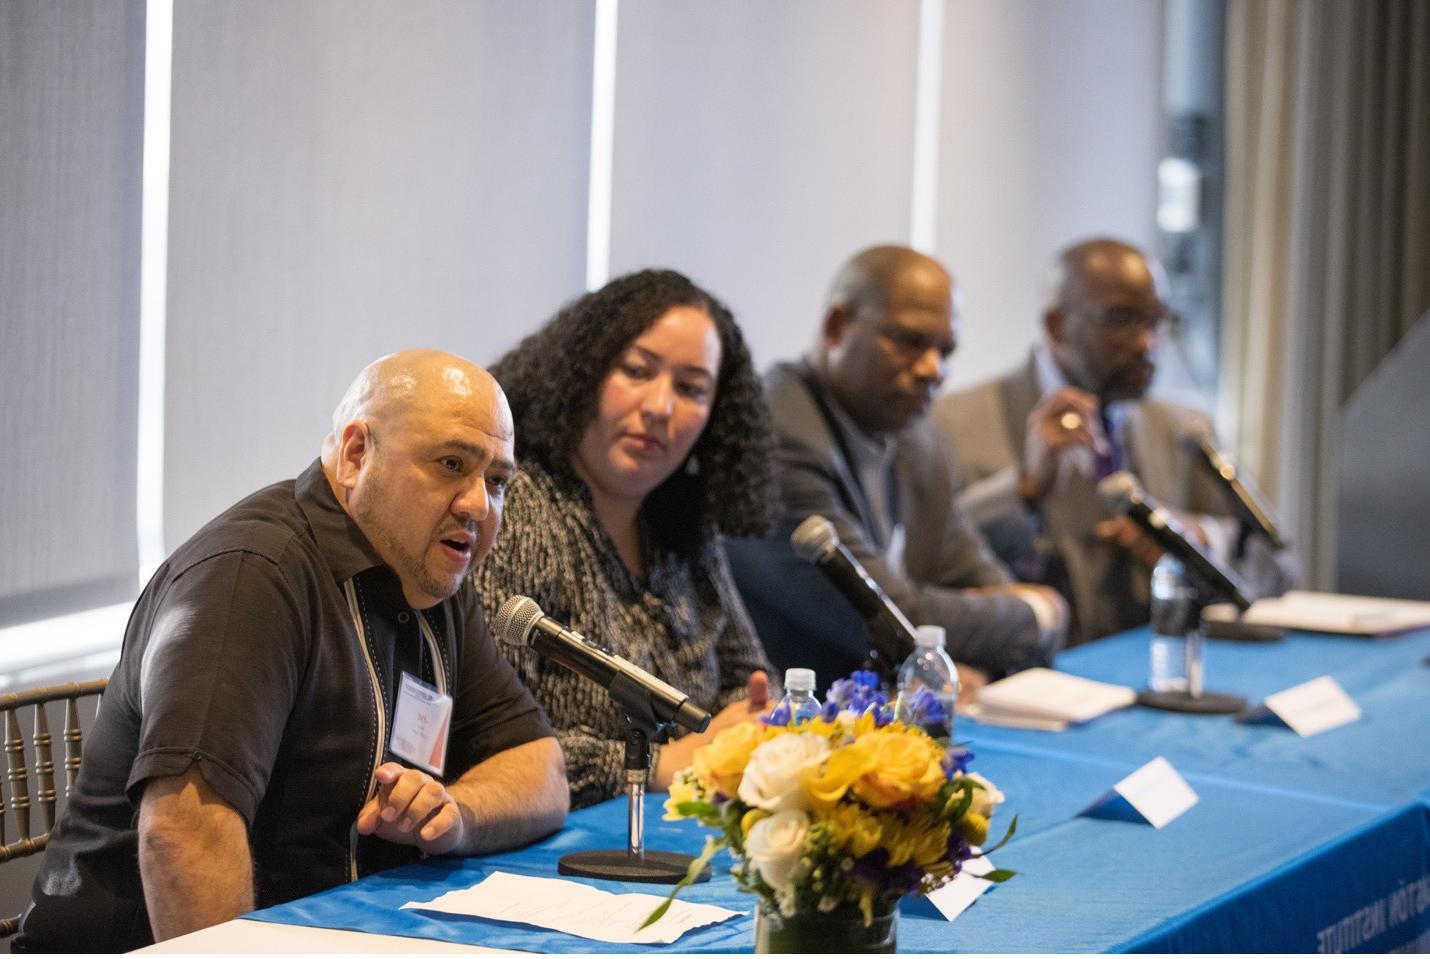 L to R: LLOP panel moderator Karl Bell, director of mentoring and academic achievement at Boston College, with panelists Carlos Maynard, Tariana Little, and Joel Mora.